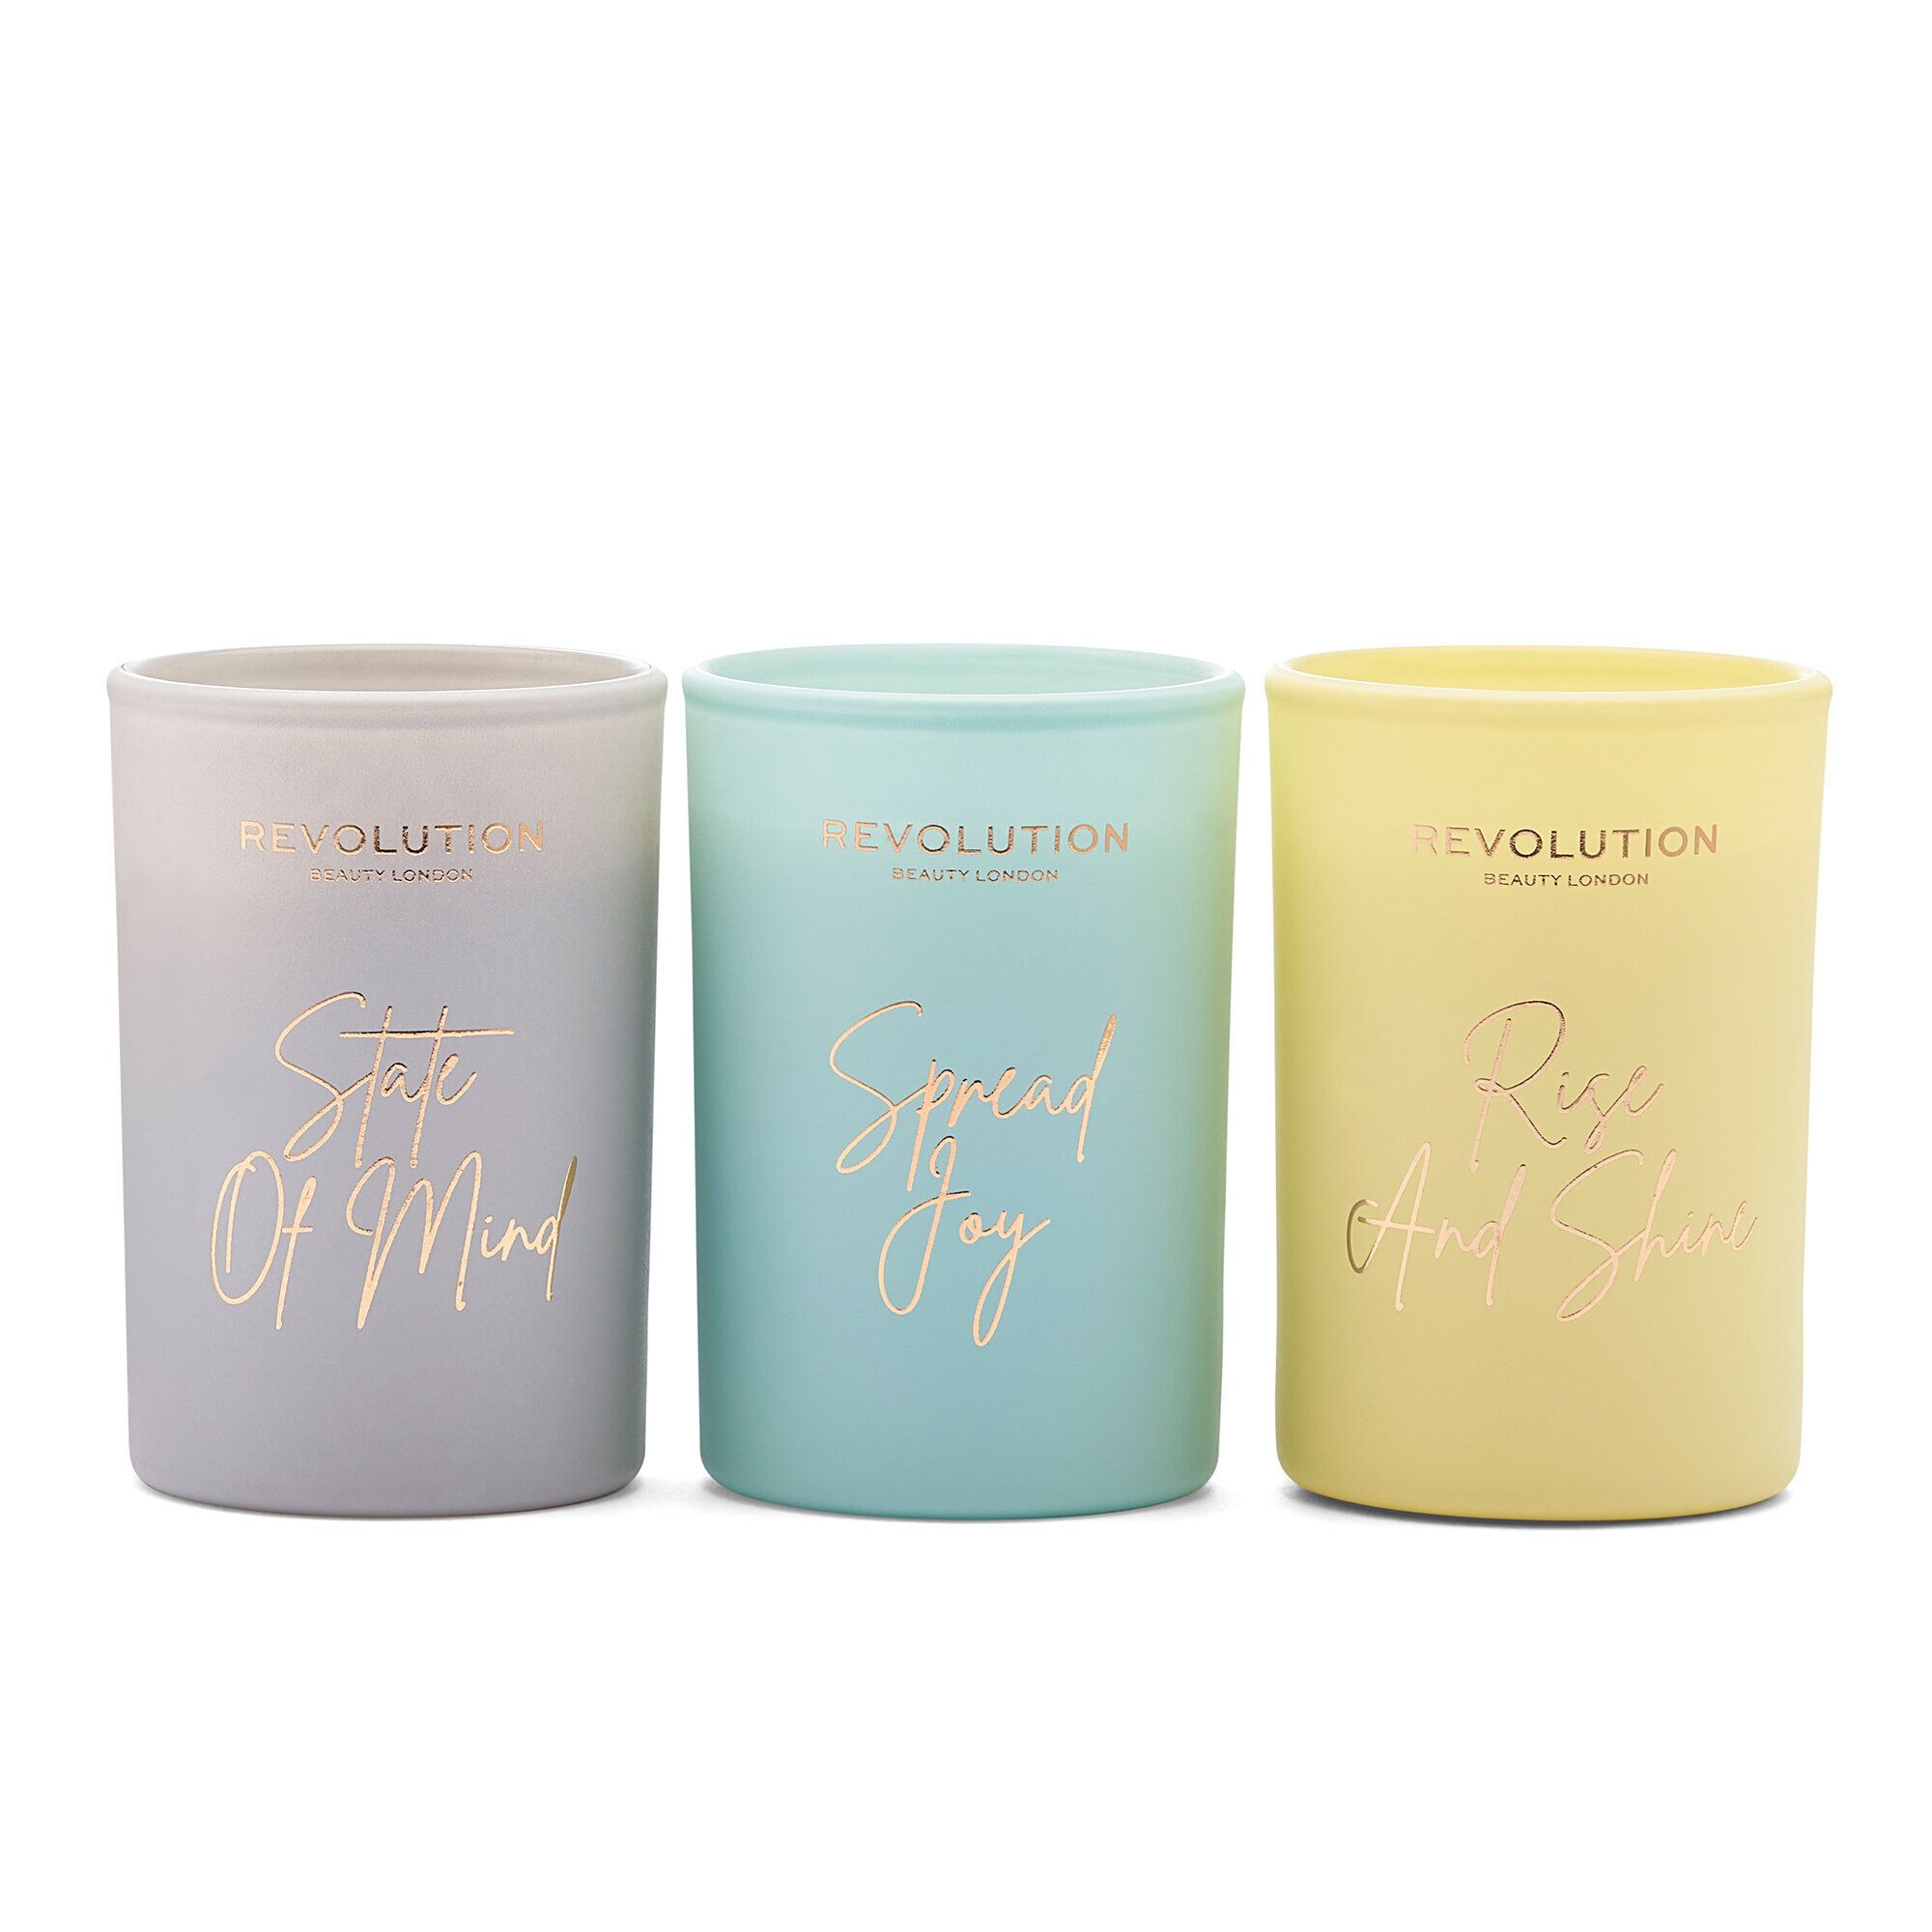 Mini Bougies Parfumées - Grounded Collection - Mini Scented Candle Trio